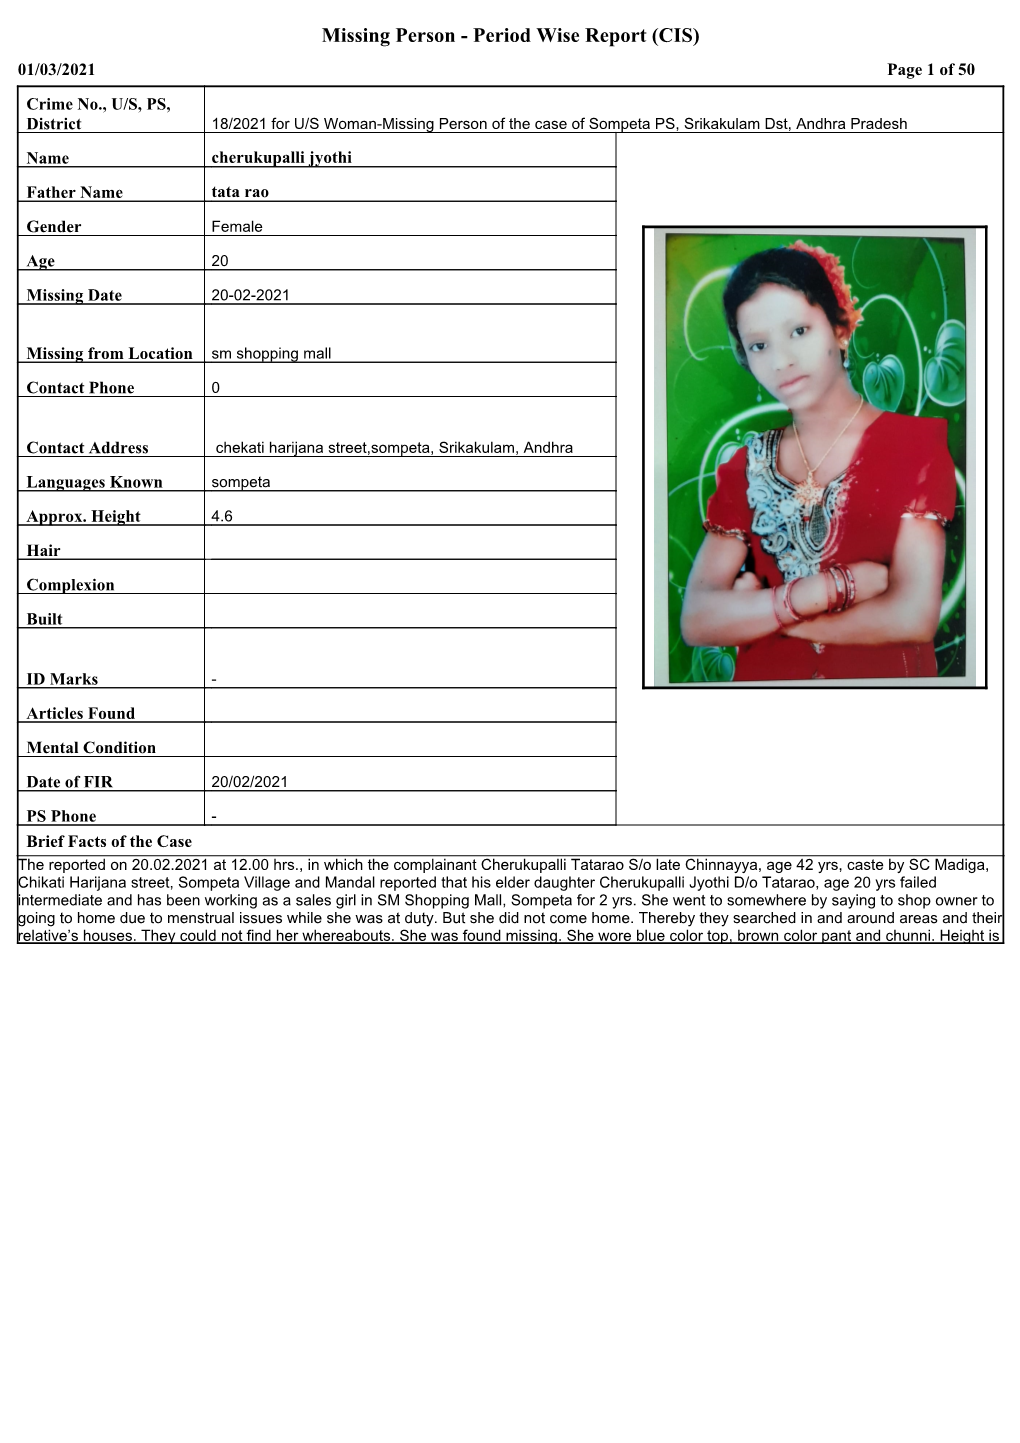 Missing Person - Period Wise Report (CIS) 01/03/2021 Page 1 of 50